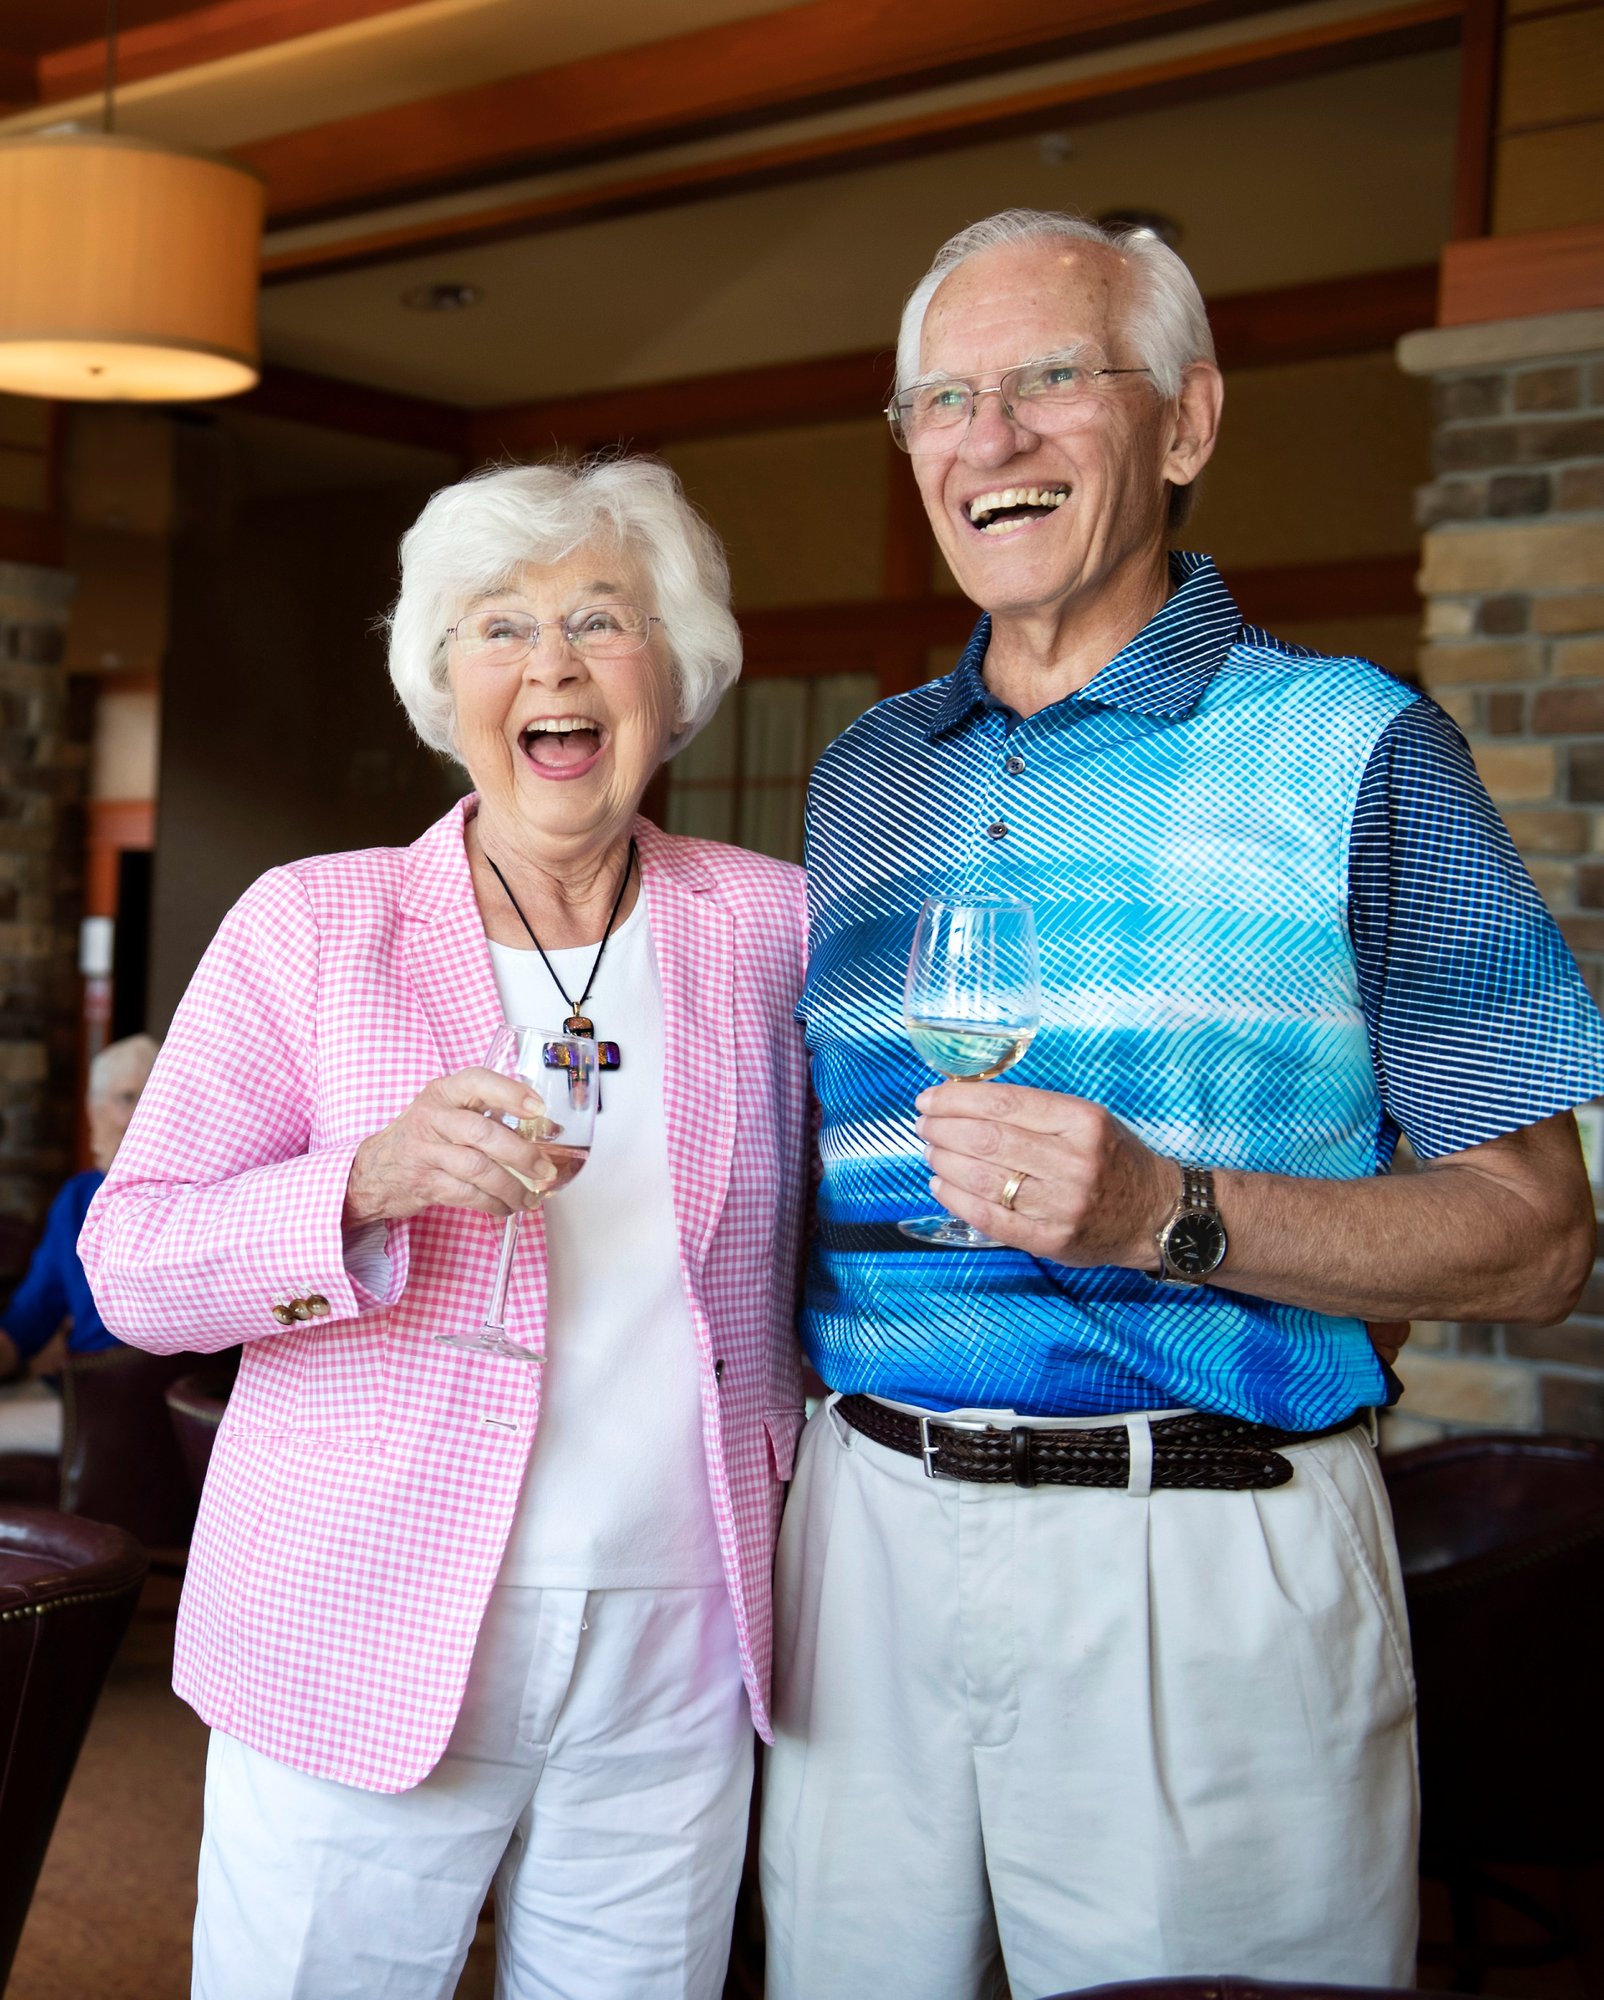 senior man and woman smiling together